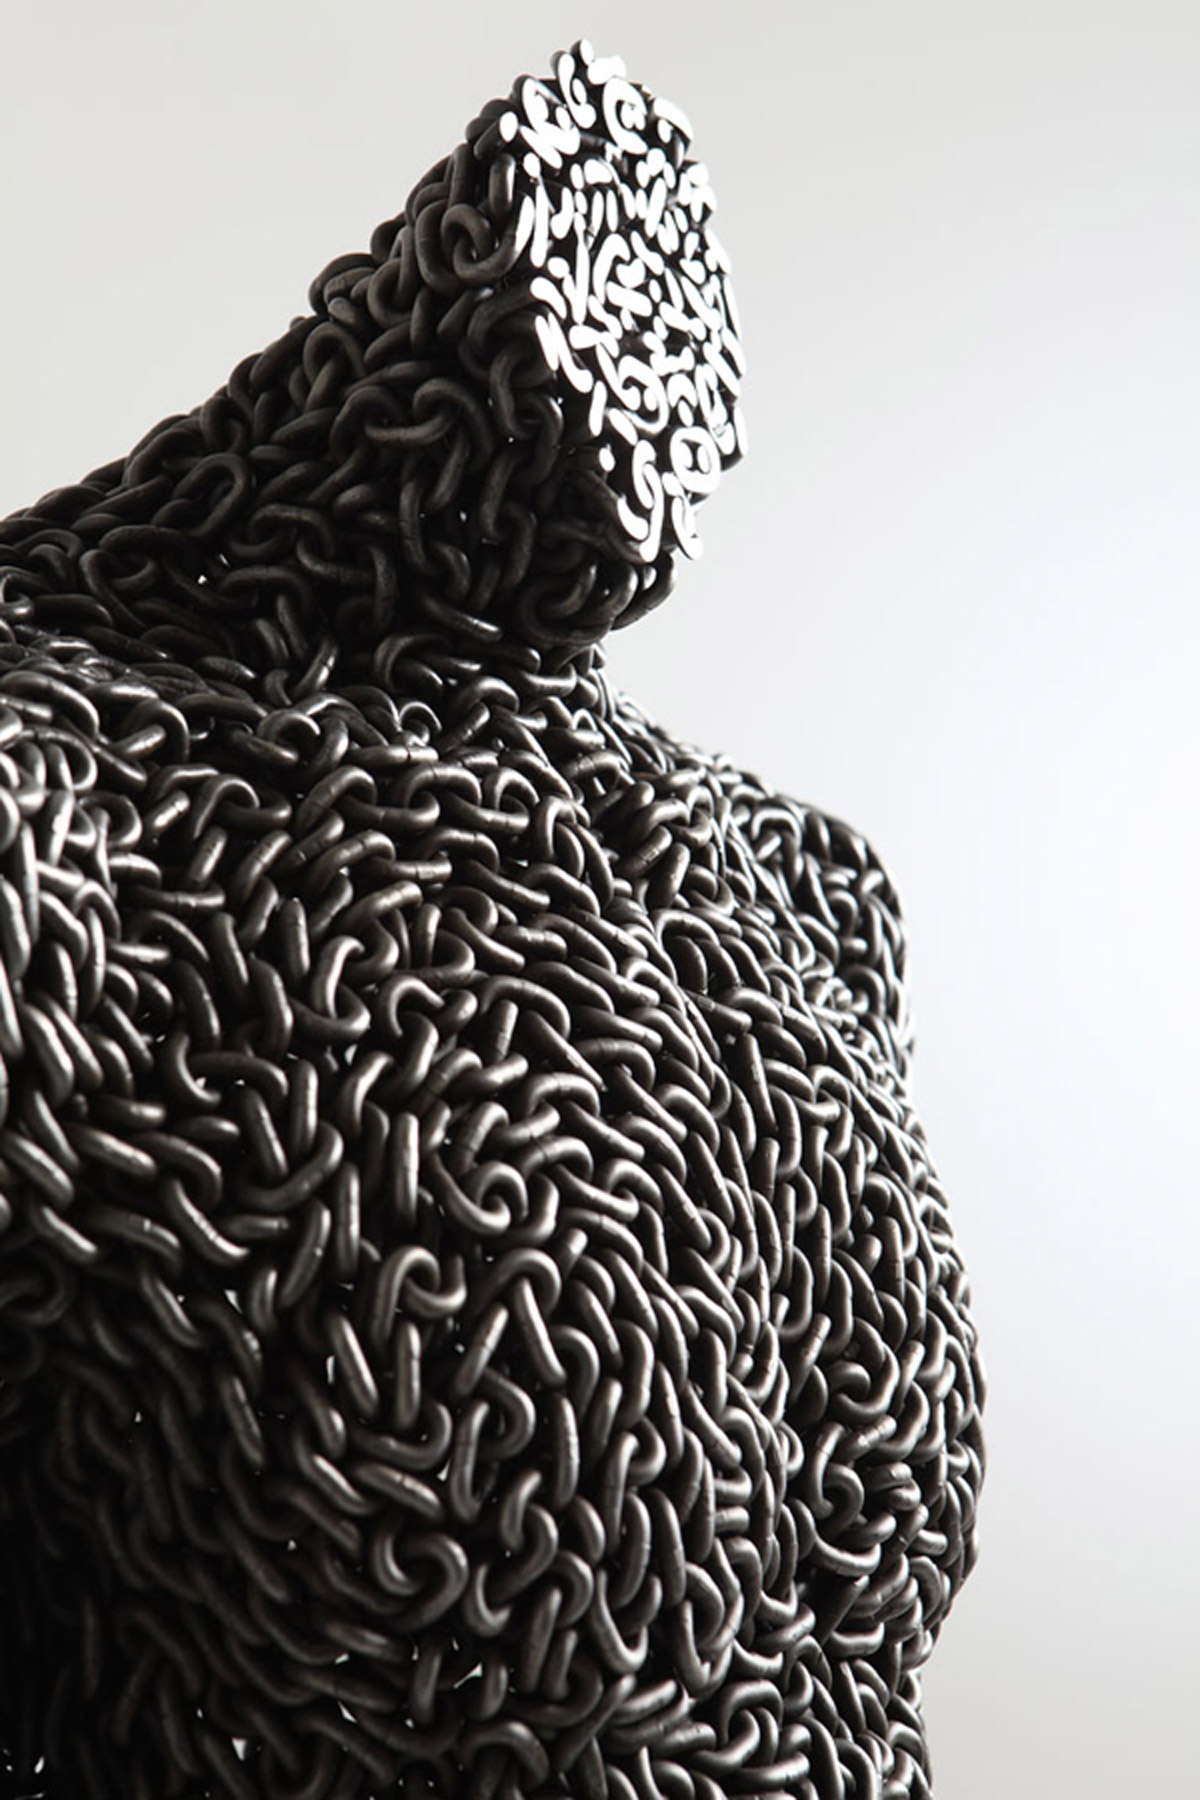 seo-young-deok-chain-sculptures-08